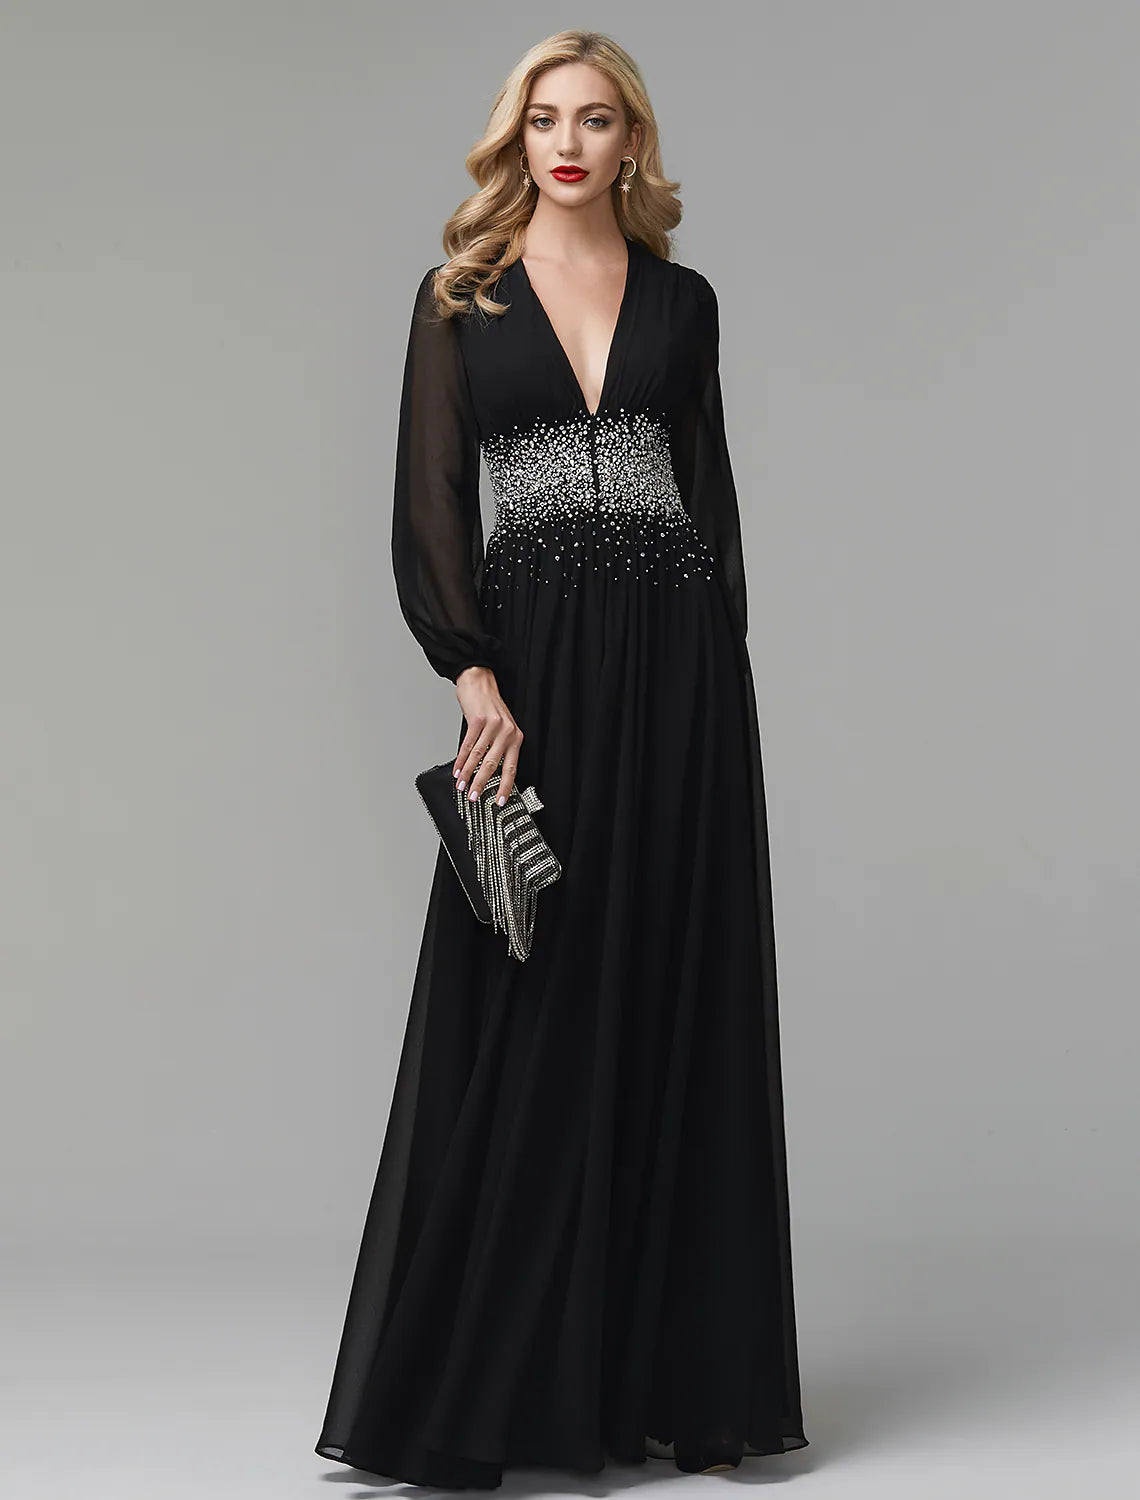 A-Line Evening Dress Celebrity Red Carpet Formal Gown Black Wedding Guest Floor Length Long Sleeve V Neck Chiffon with Sequin